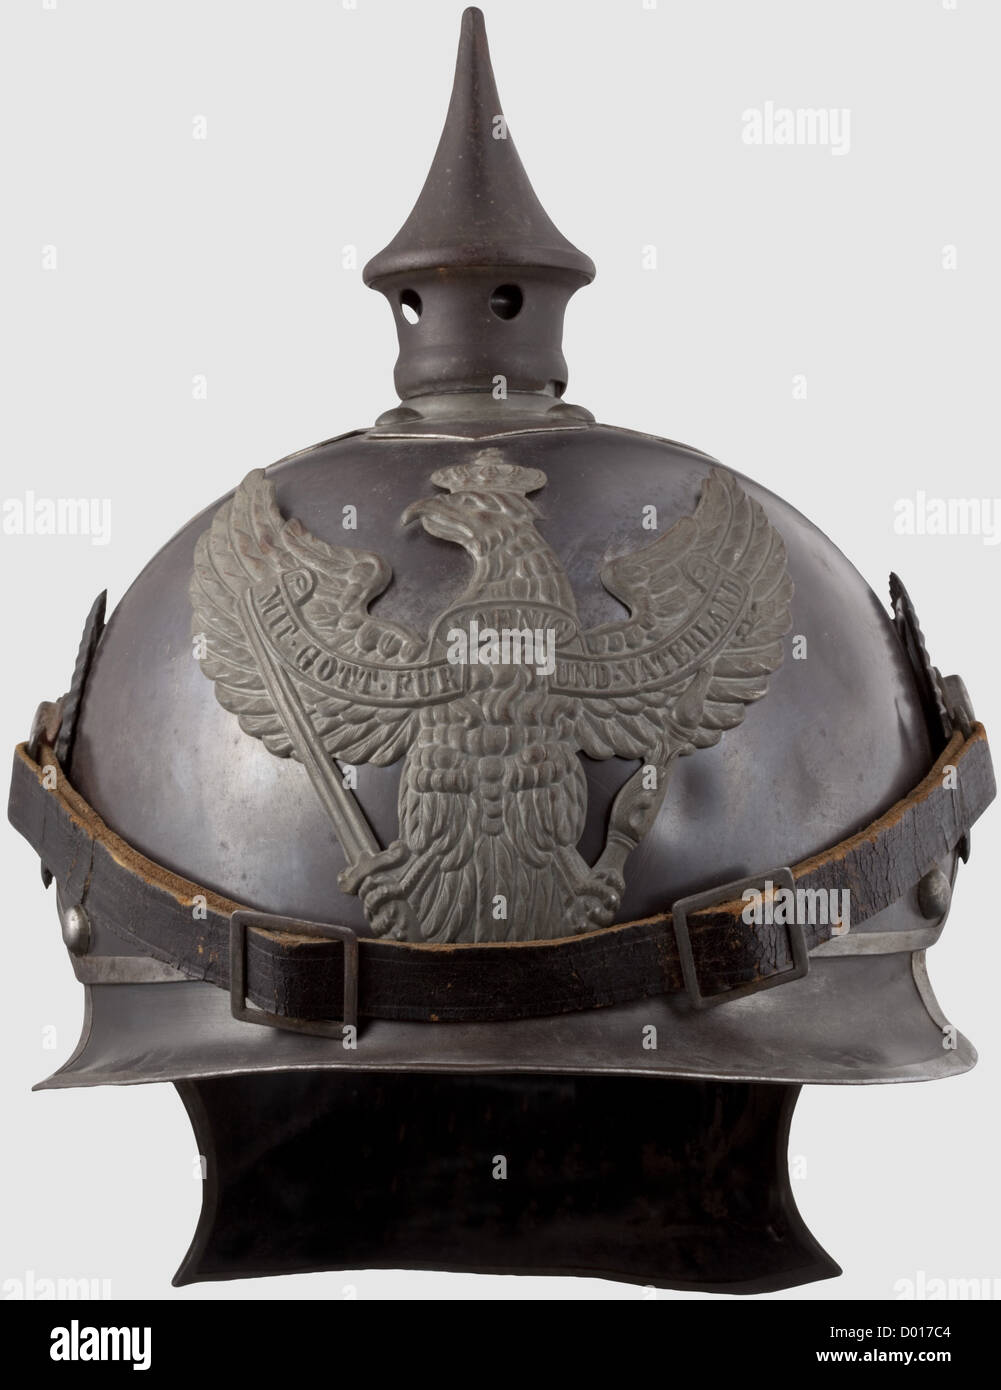 A model 1915 helmet for enlisted men,Blued steel skull with bright metal trim and rivets. Field grey spike on a bayonet mount. Field grey dragoon eagle. Leather chinstraps on '91' buttons. Enlisted men's cockades. Leather lining. The maker's inscription 'Weissenburger & Cie Cannstatt' is inside at the top,historic,historical,1910s,20th century,Prussian,Prussia,German,Germany,militaria,military,object,objects,stills,clipping,clippings,cut out,cut-out,cut-outs,helmet,helmets,headpiece,headpieces,utensil,piece of equipment,utensils,prote,Additional-Rights-Clearences-Not Available Stock Photo